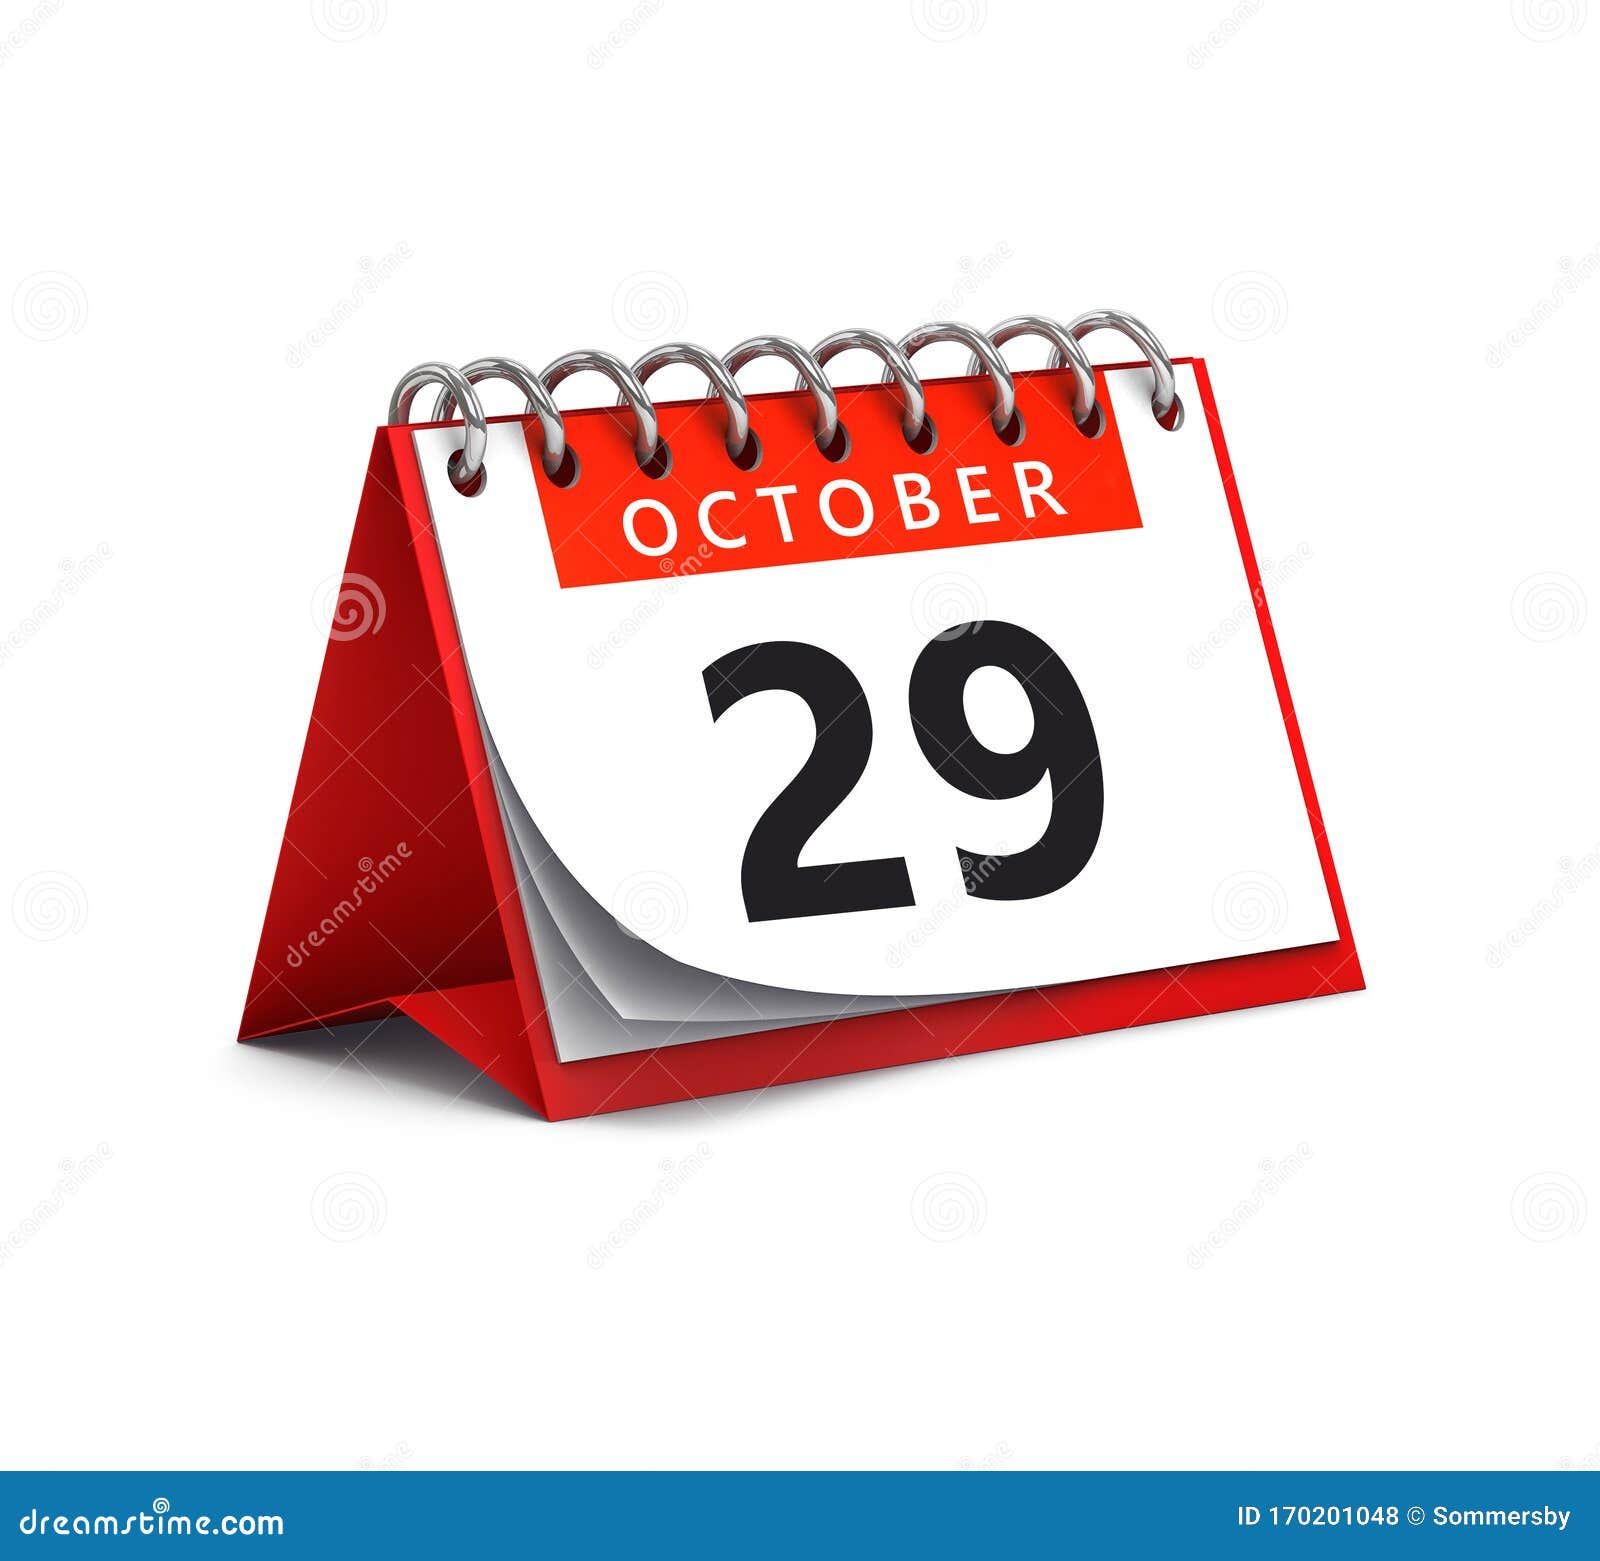 3d rendering of red desk paper autumn month of october 29 date - calendar page  on whit